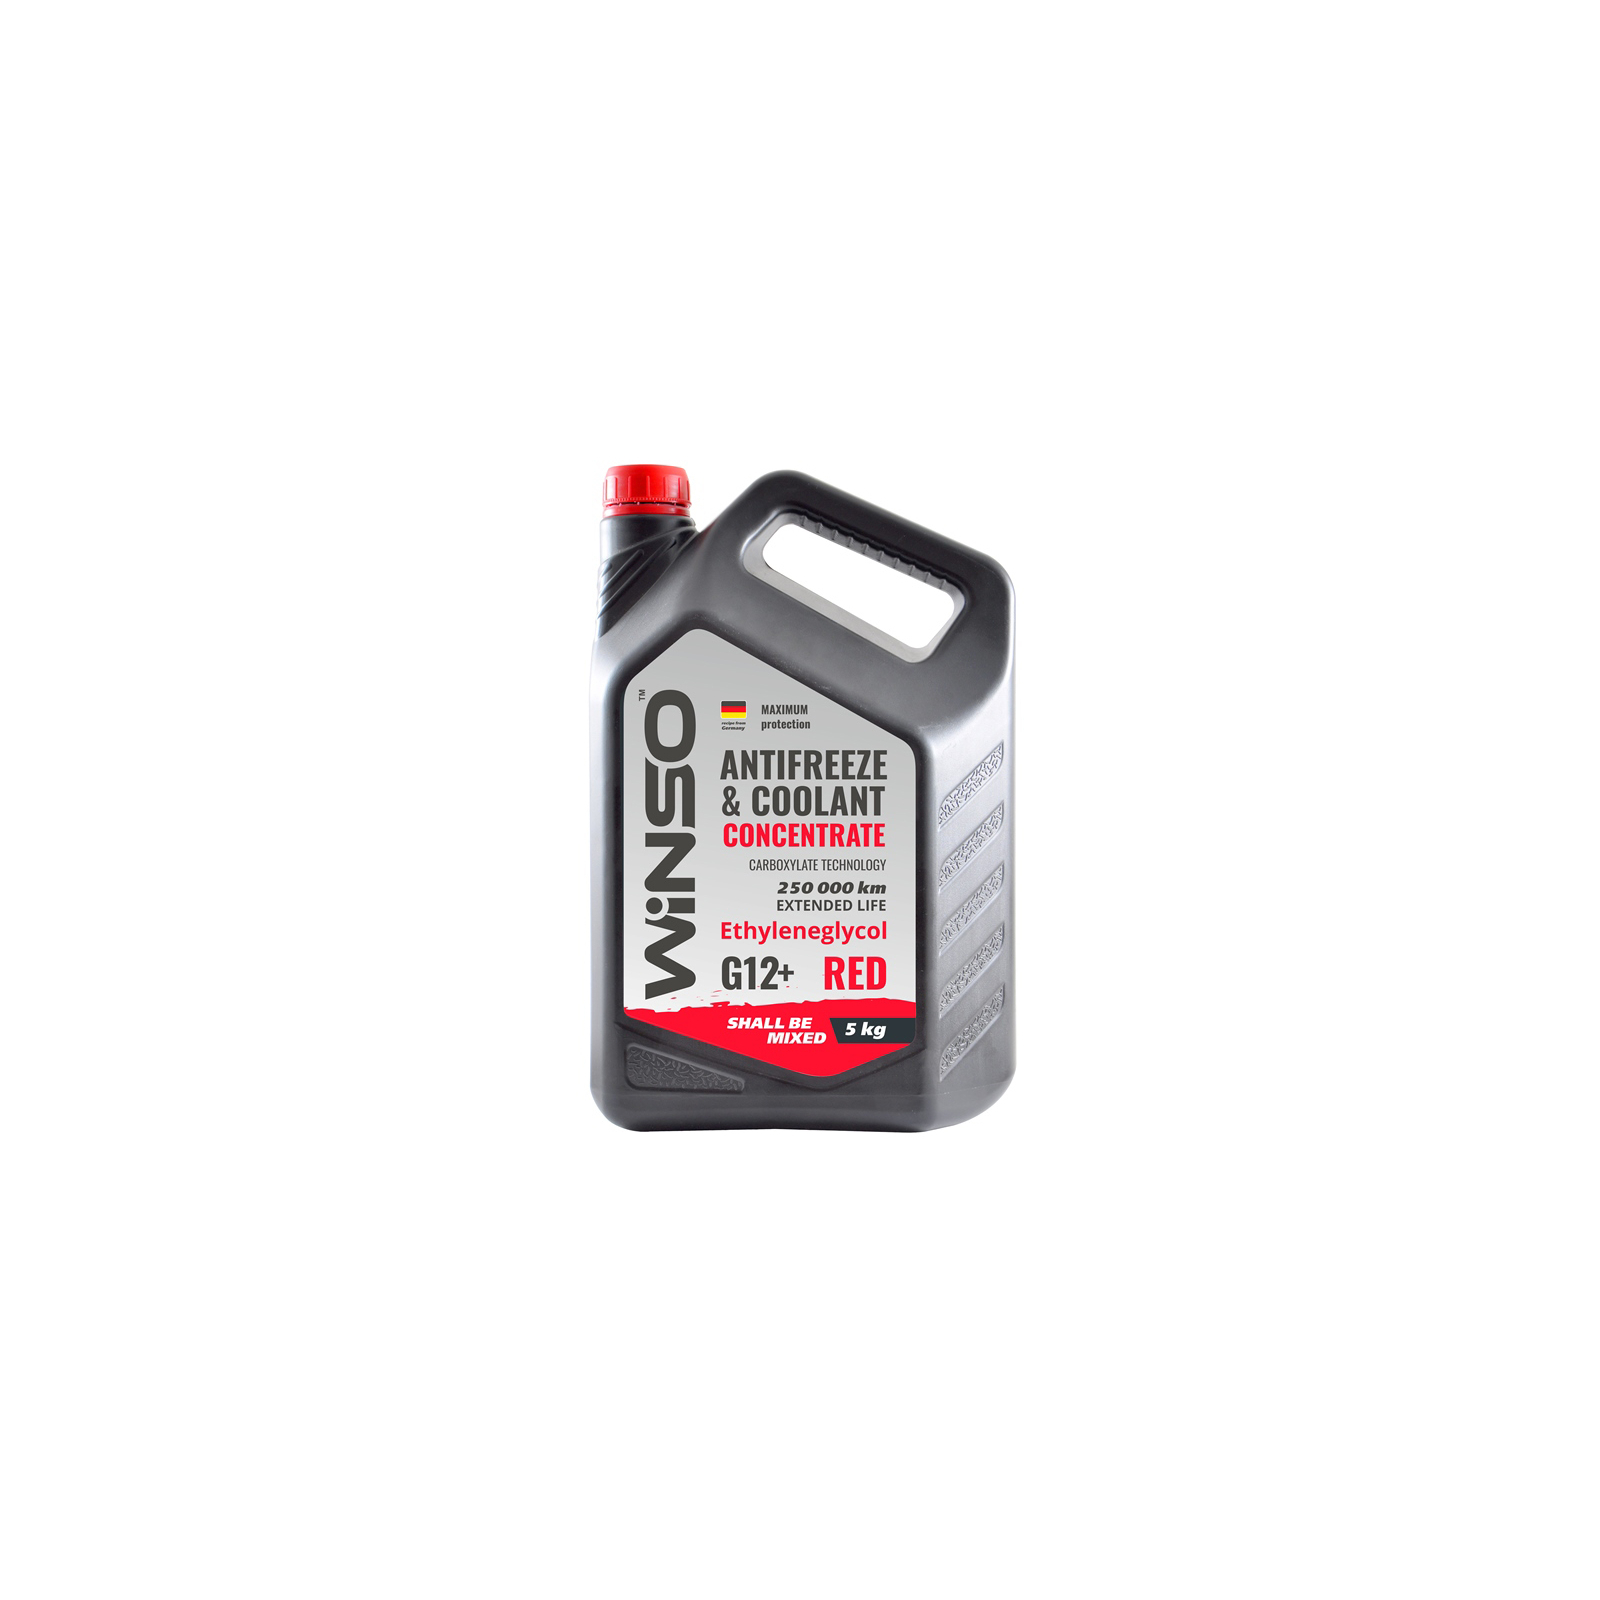 Антифриз WINSO COOLANT CONCENTRATE WINSO RED G 12+ концентрат 5kg (880990)